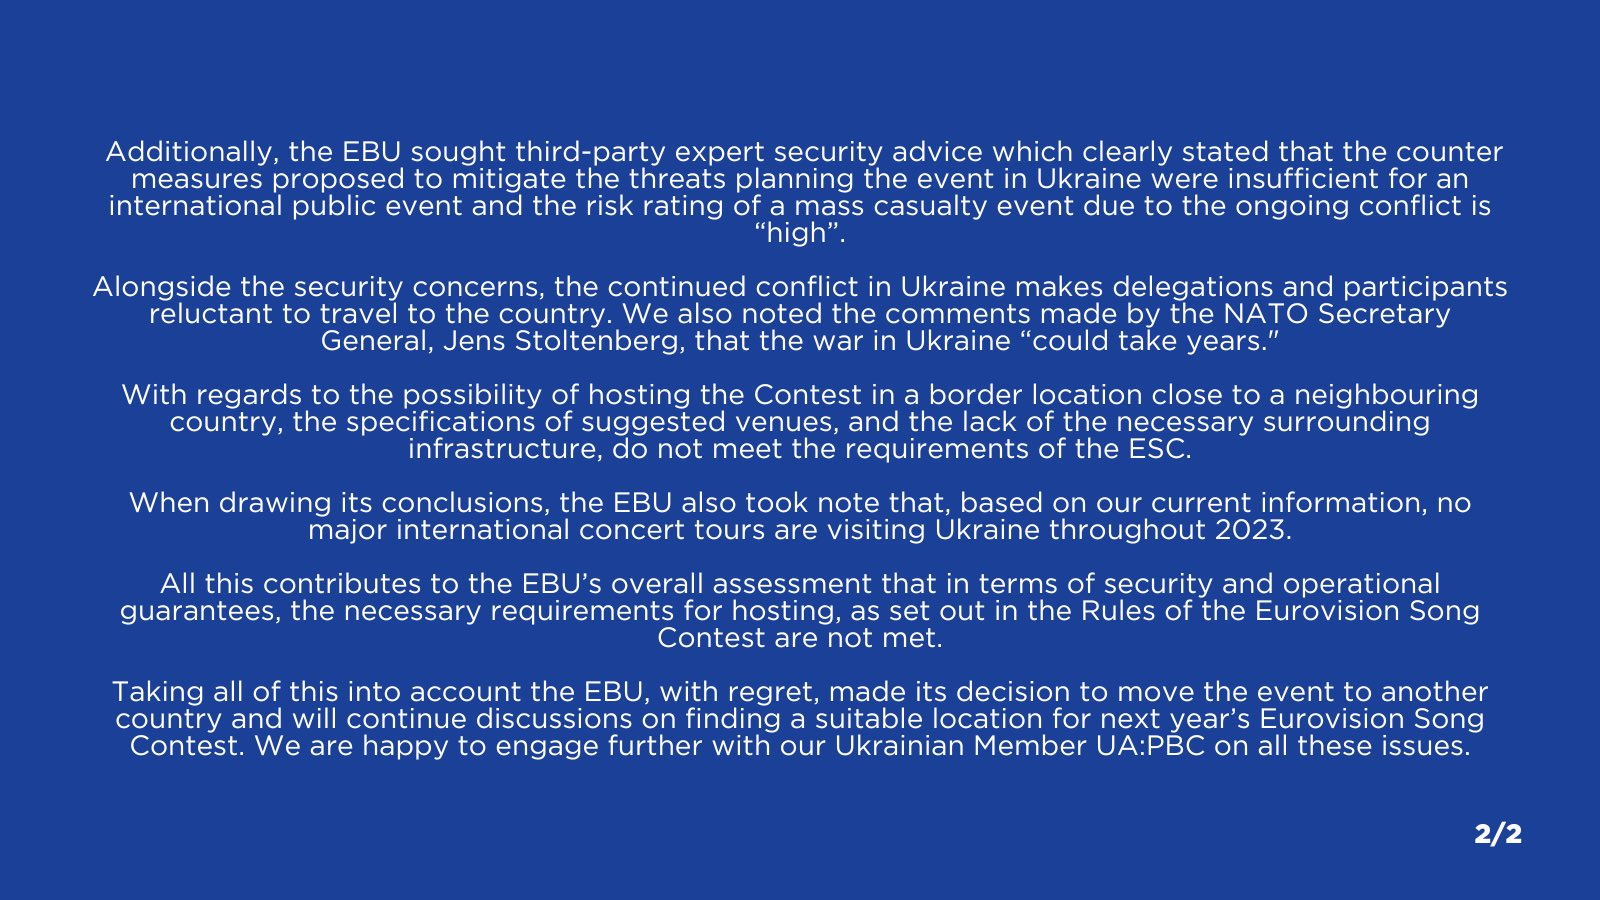 Additionally, the EBU sought third-party expert security advice which clearly stated that the counter measures proposed to mitigate the threats planning the event in Ukraine were insufficient for an international public event and the risk rating of a mass casualty event due to the ongoing conflict is “high”.
Alongside the security concerns, the continued conflict in Ukraine makes delegations and participants reluctant to travel to the country. We also noted the comments made by the NATO Secretary General, Jens Stoltenberg, that the war in Ukraine “could take years."
With regards to the possibility of hosting the Contest in a border location close to a neighbouring country, the specifications of suggested venues, and the lack of the necessary surrounding infrastructure, do not meet the requirements of the ESC.